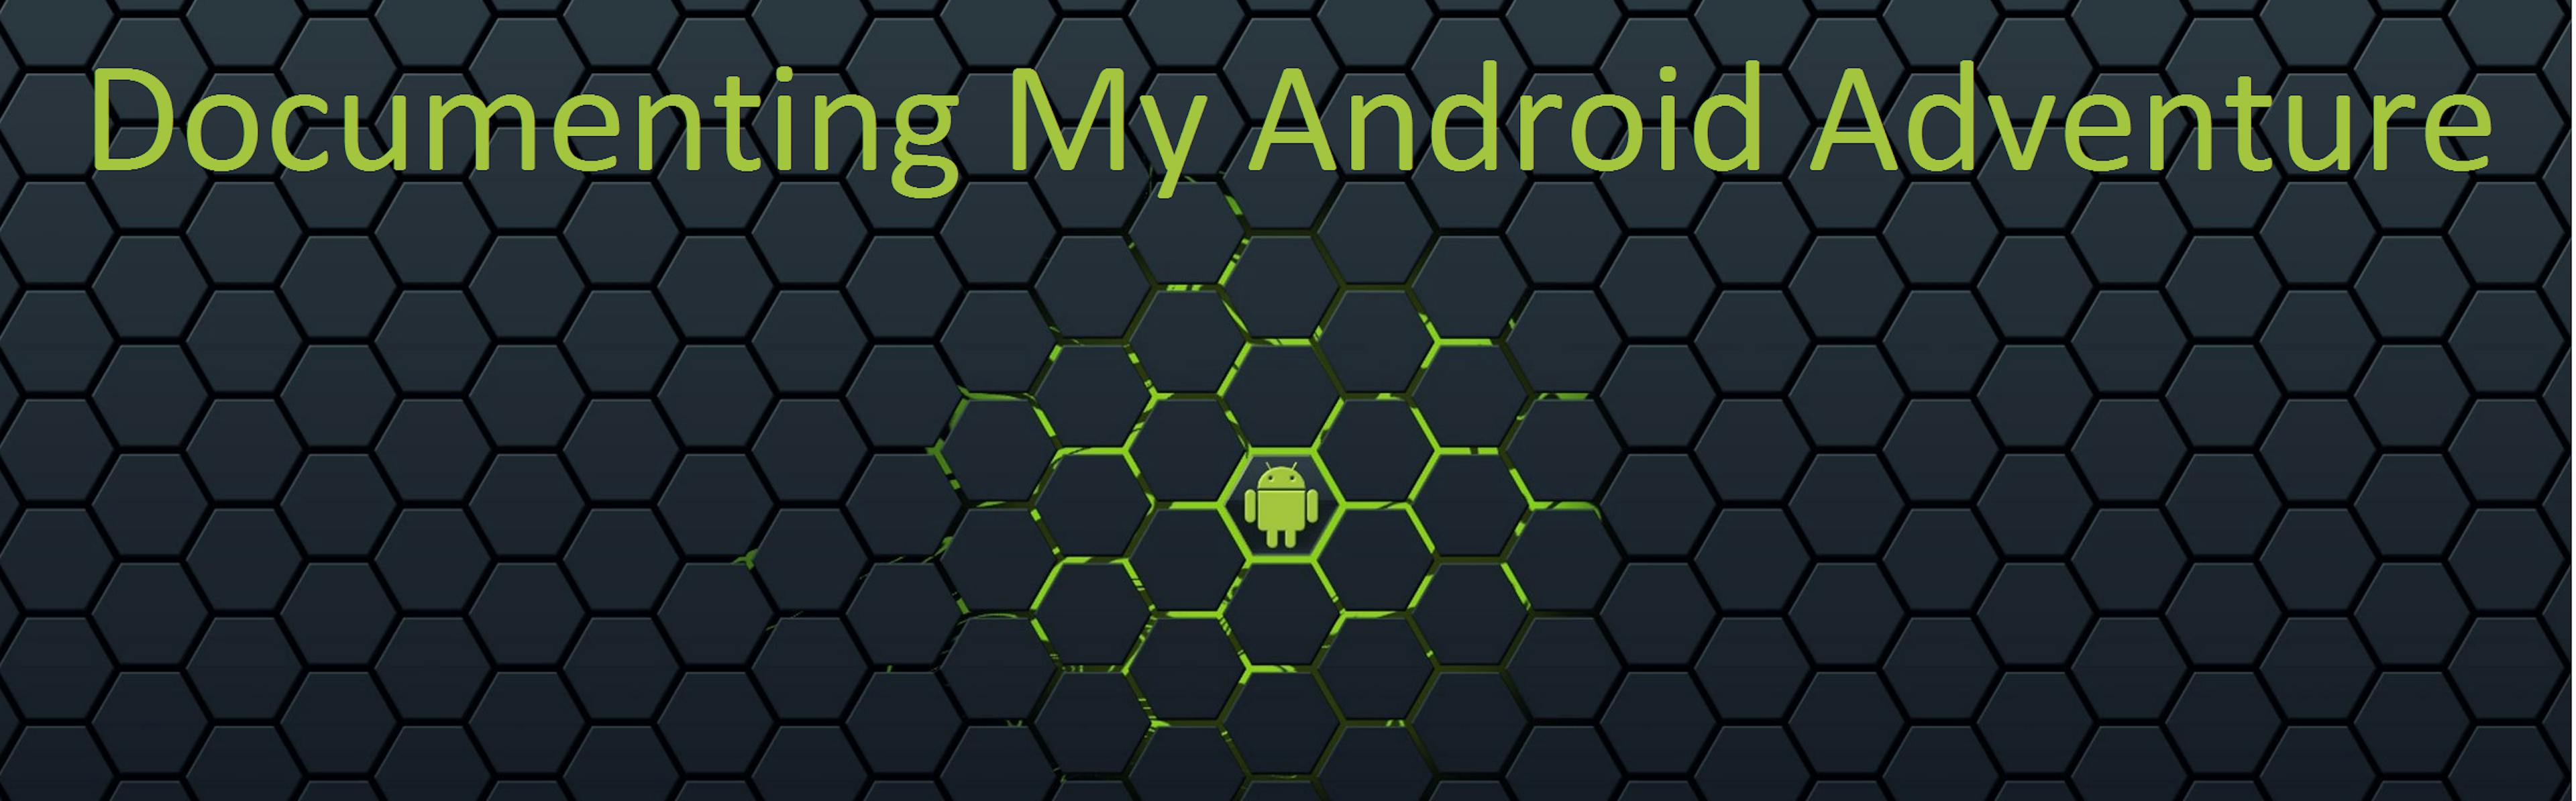 featured image - Documenting My Android Adventure